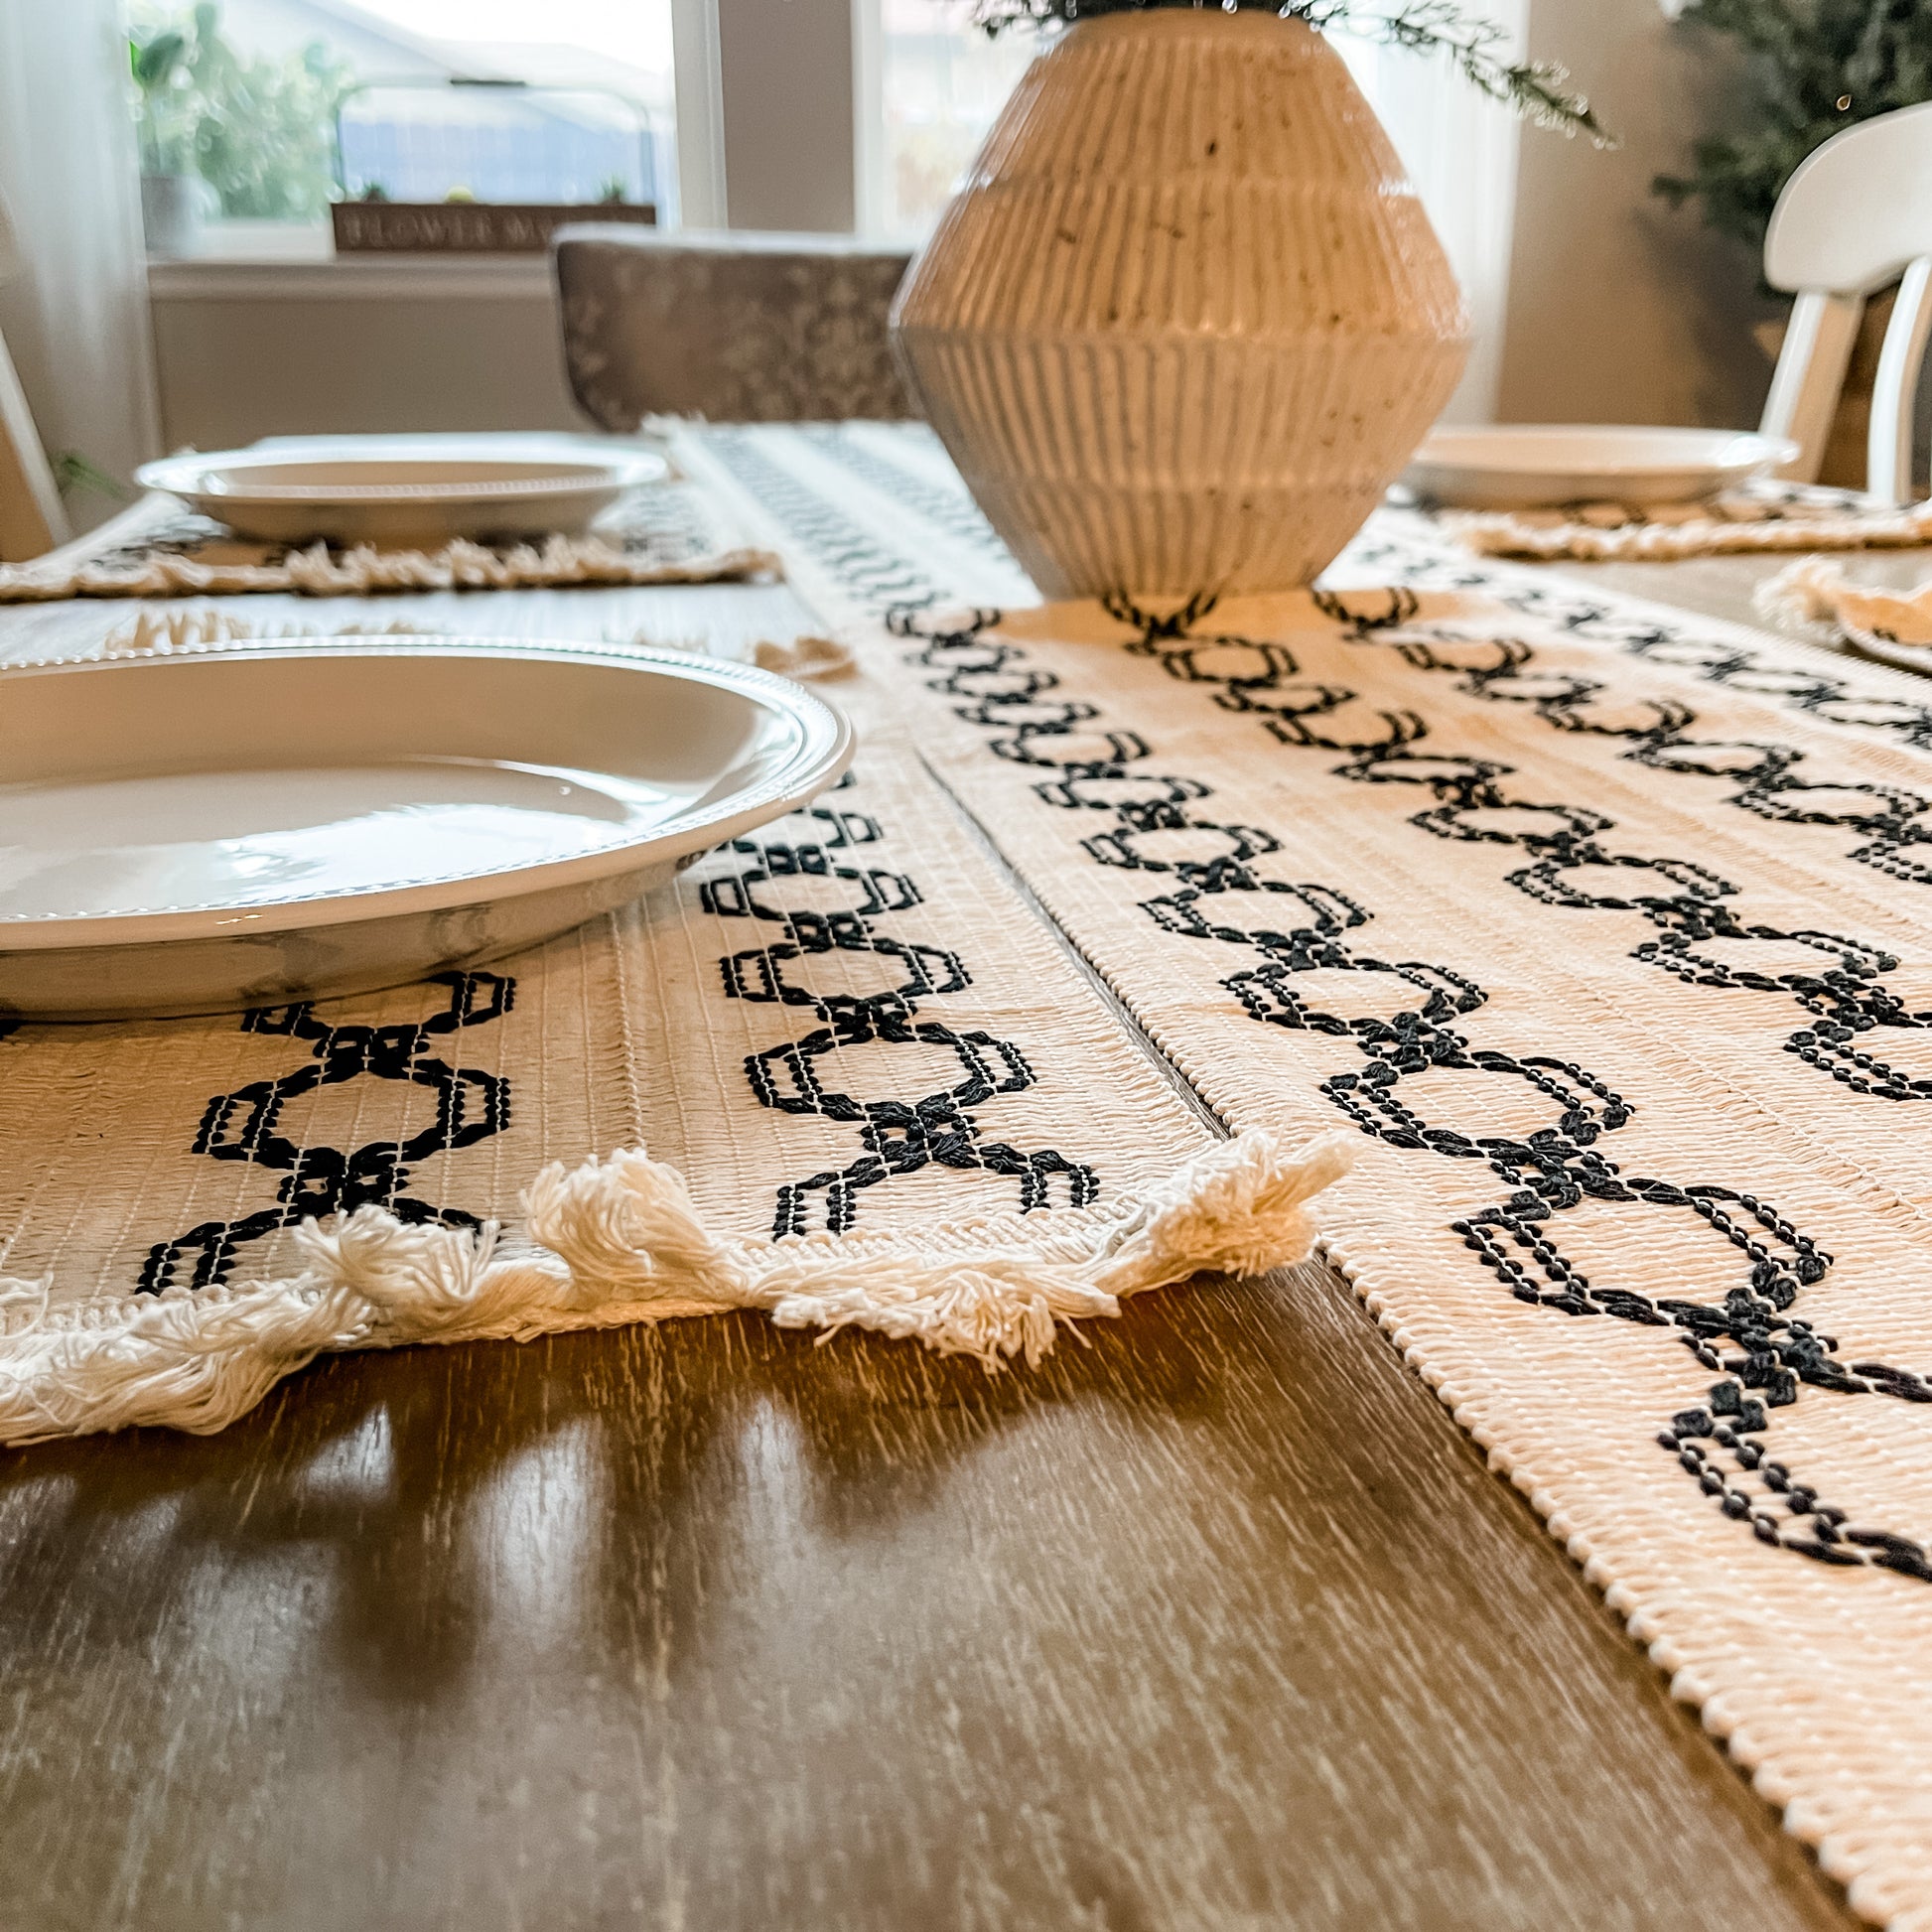 Classic Modern Patterned Table Runners, Home Decor